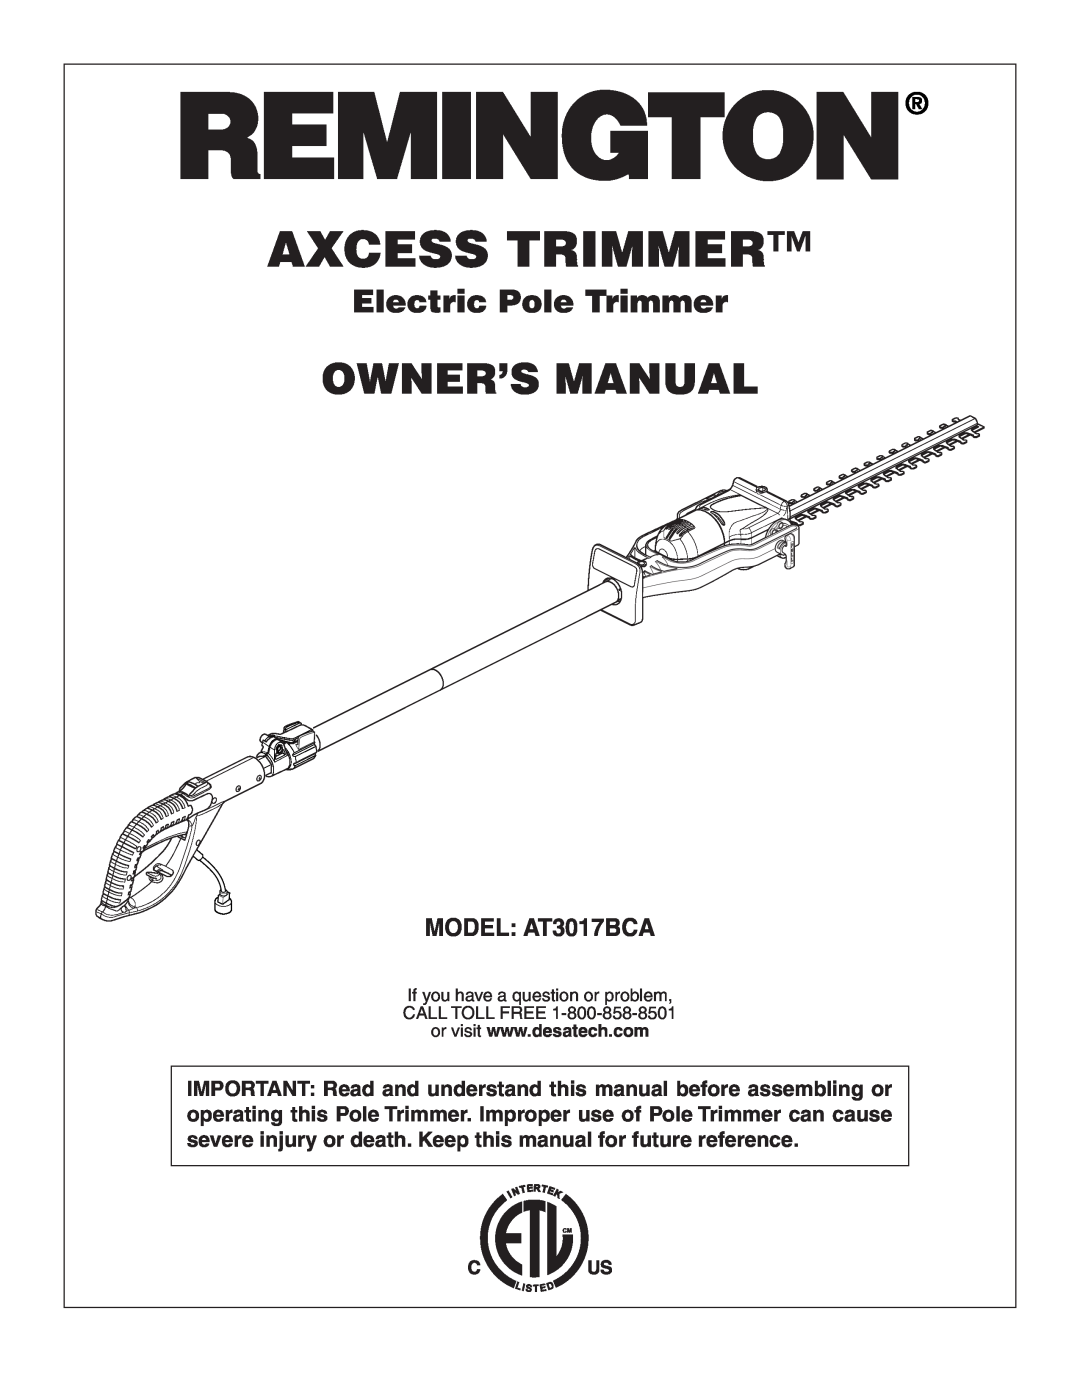 Remington owner manual Axcess Trimmer, Electric Pole Trimmer, MODEL AT3017BCA 